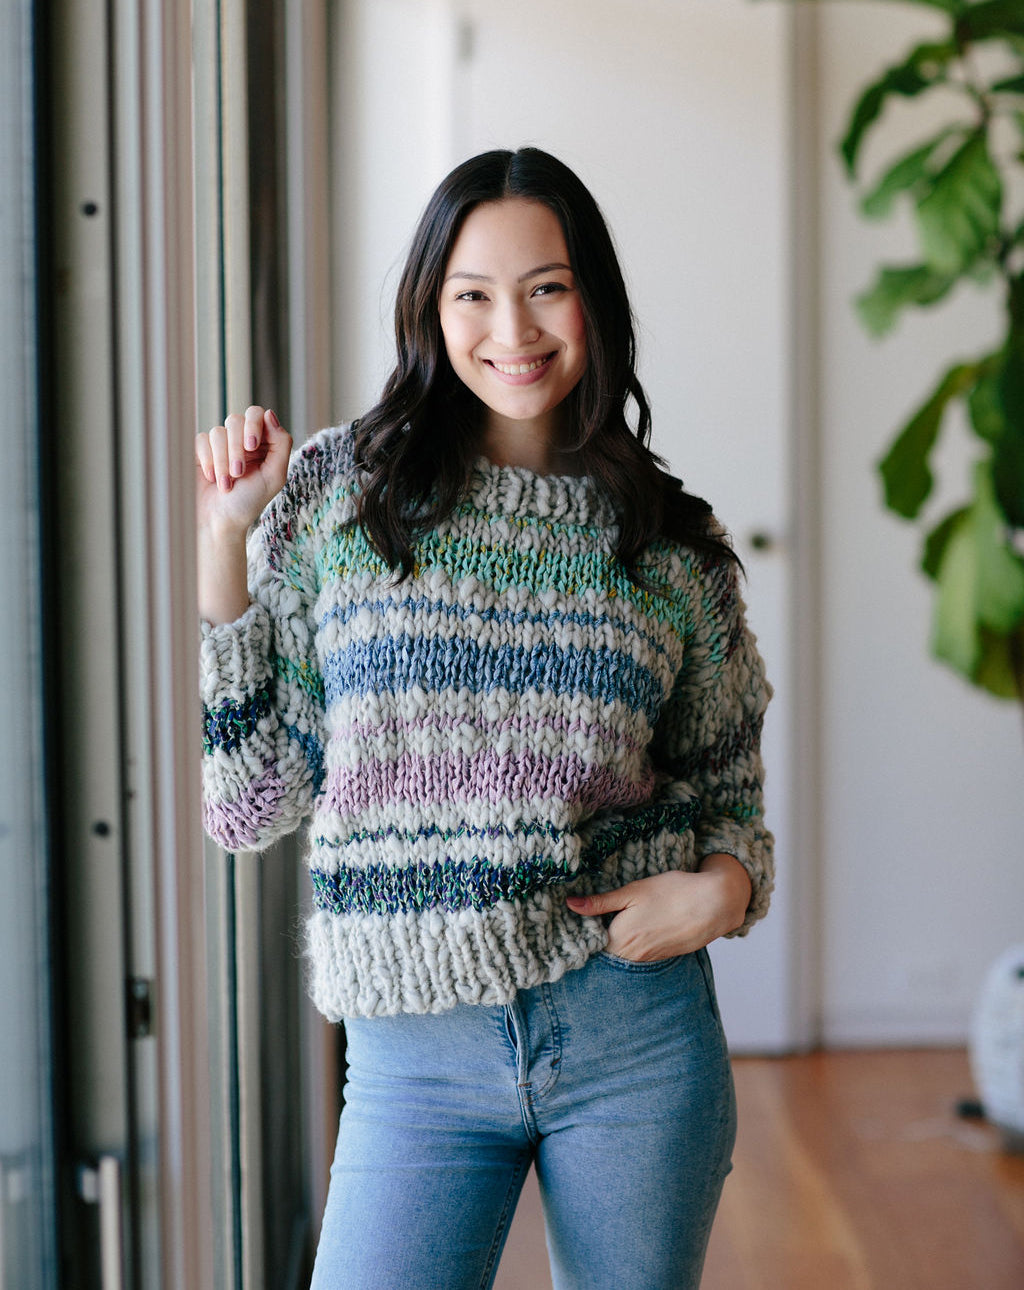 Model holding one arm up and hand in pocket wearing striped sweater.